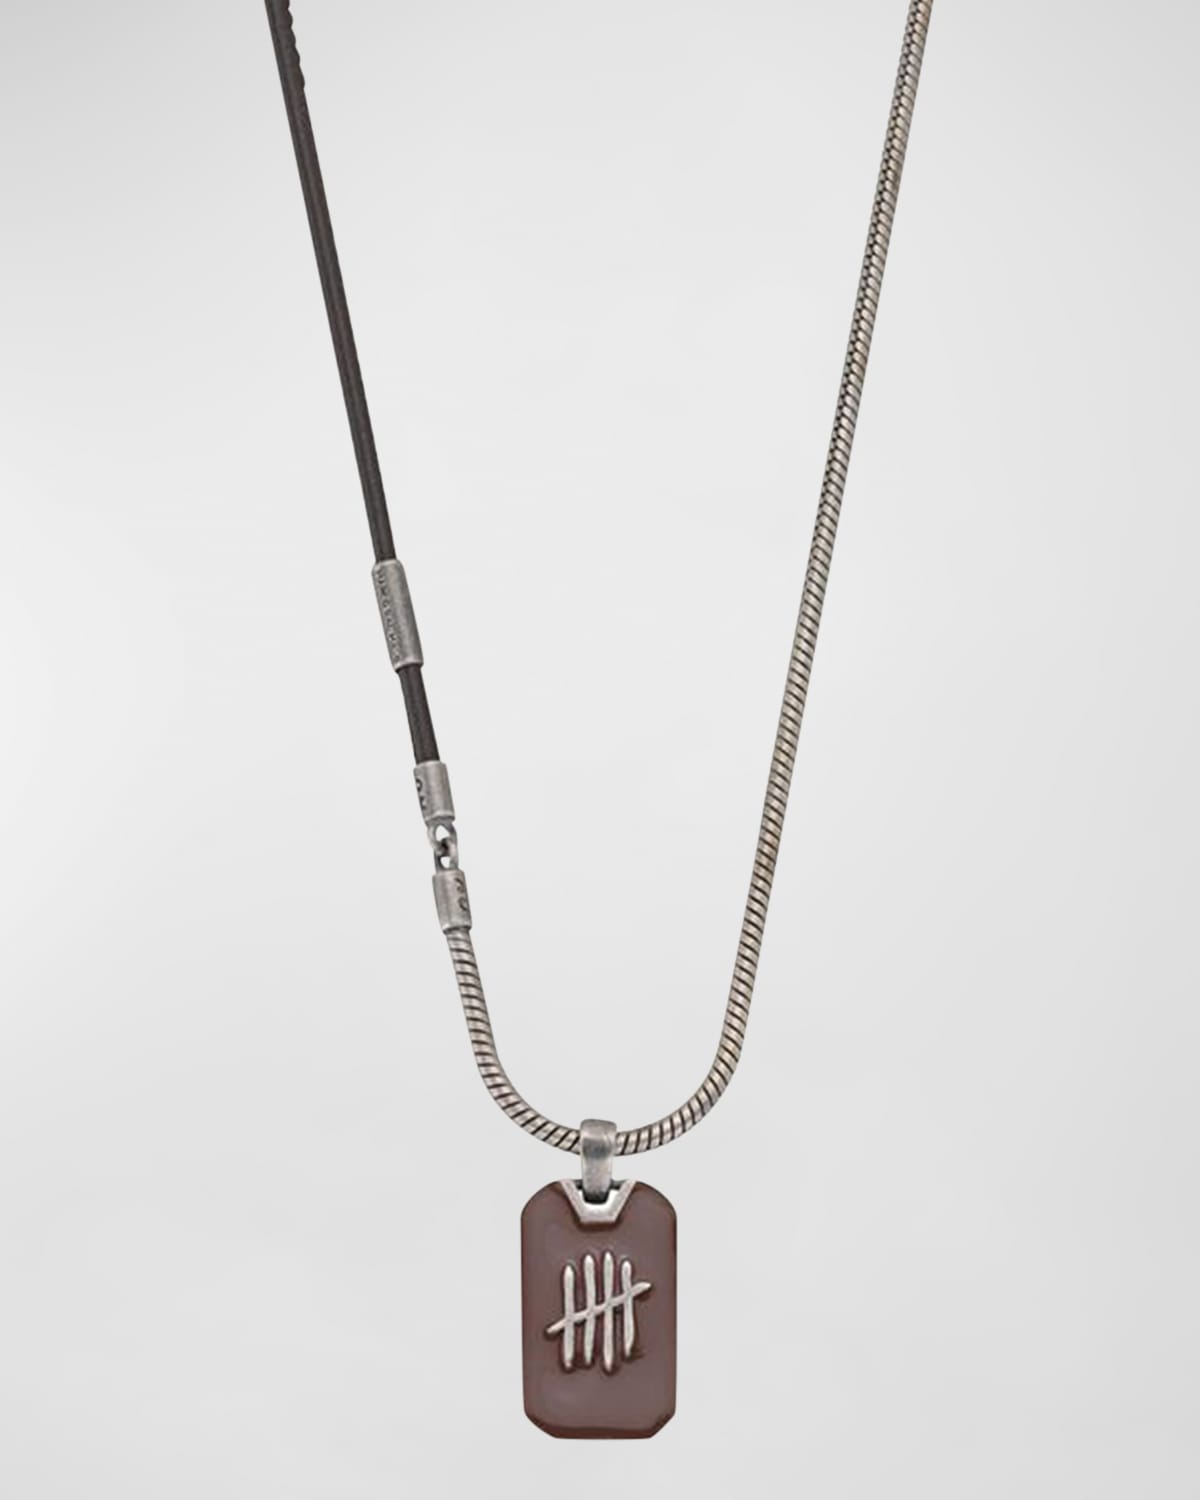 Marco Dal Maso Triumph Tag Pendant Necklace in Oxidized Silver, Brown Enamel and Brown Leather